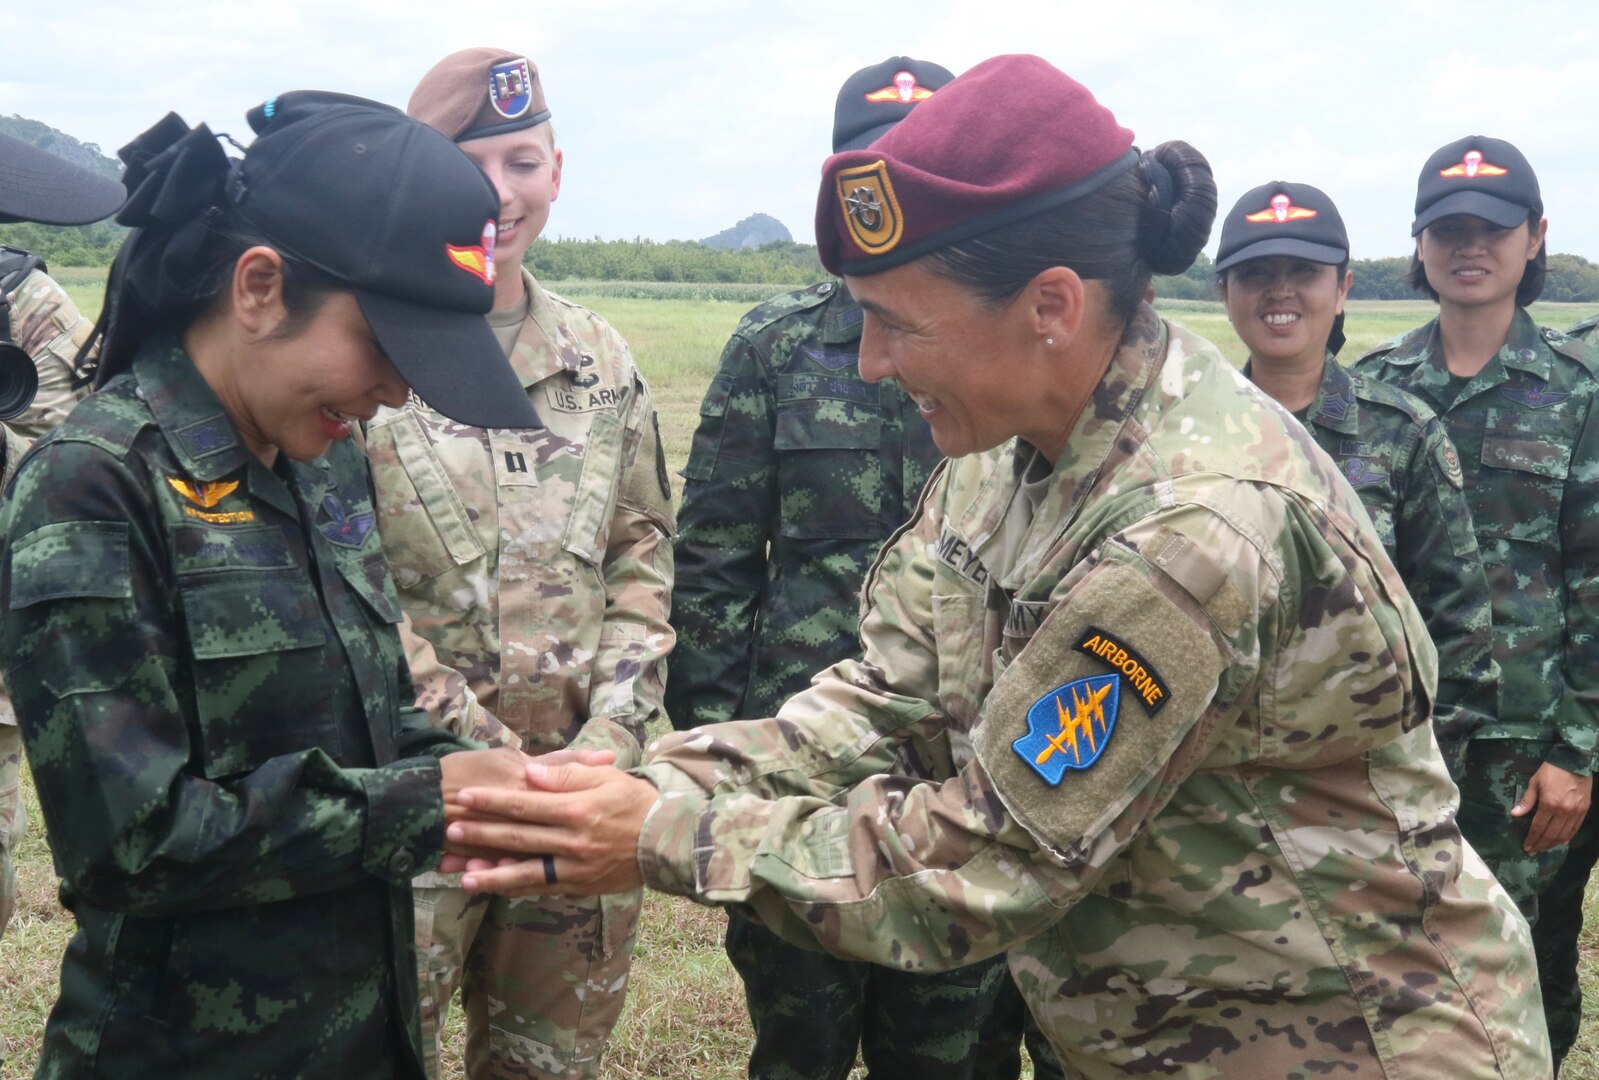 Royal Thai Army Capt. Napason Kingyong receives U.S. Master Parachutist Jump Wings from 1st Sgt. Sarah Meyers, U.S. Army Forward Support Company, 1st Battalion, 1st Special Forces Group (Airborne), who served as a U.S. Army Special Operations Forces jumpmaster mentor during the Royal Thai Army first all-female Basic Airborne Course conducted by the RTA Special Warfare School at Camp Erawan, Lop Buri, Thailand, 9, 2023. The United States and Thailand have nearly two centuries of diplomatic relations and have been security treaty allies for over 66 years. Our continued, face-to-face exchanges with our allies and partners are a foundation of a our bilateral relationships, and bolster understanding in the region that we are going to be a reliable partner in both good and bad times. (U.S. Air Force photo by Master Sgt. Theanne Tangen)